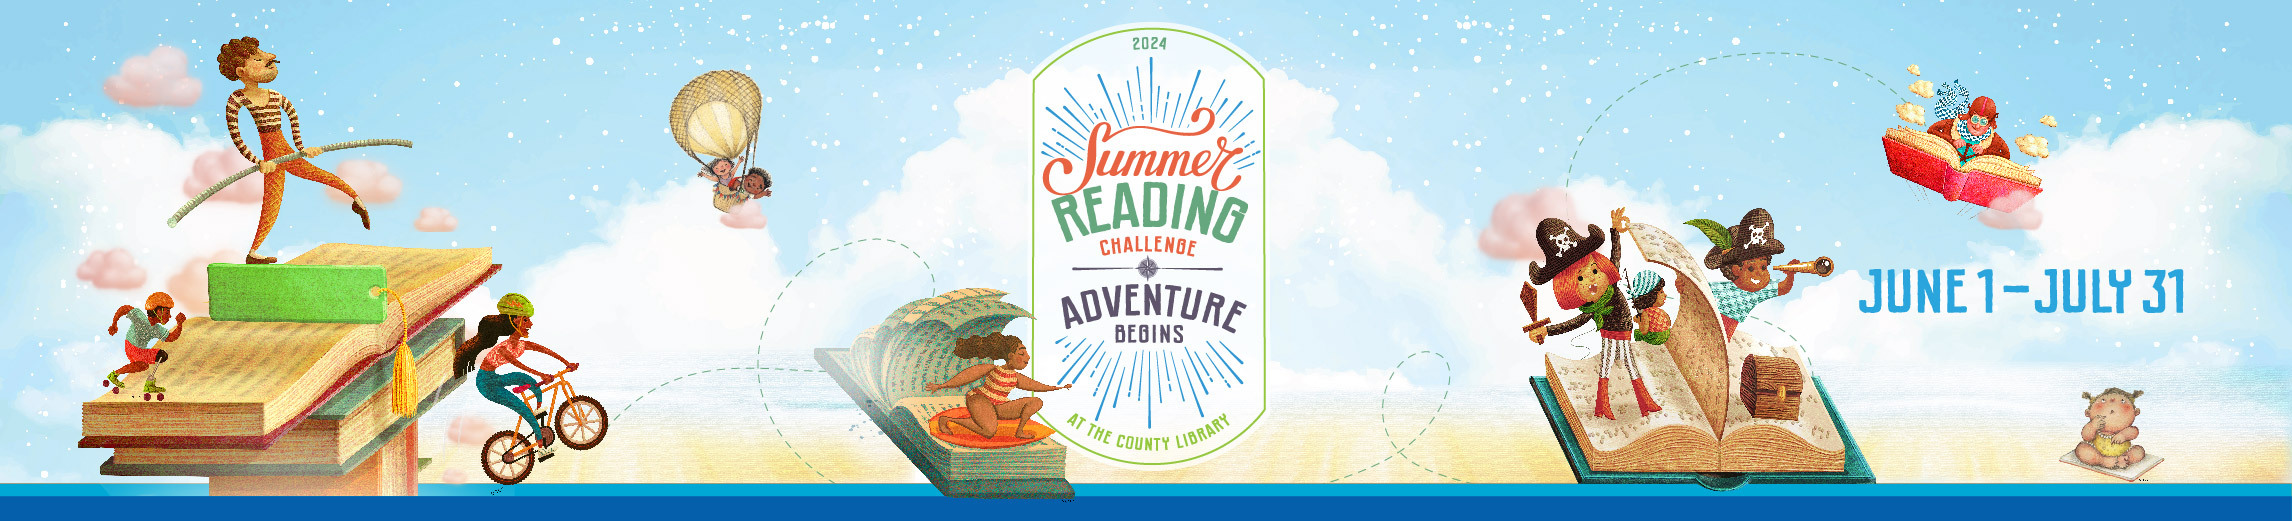 Summer Reading Challenge at the County Library June 1-July 31